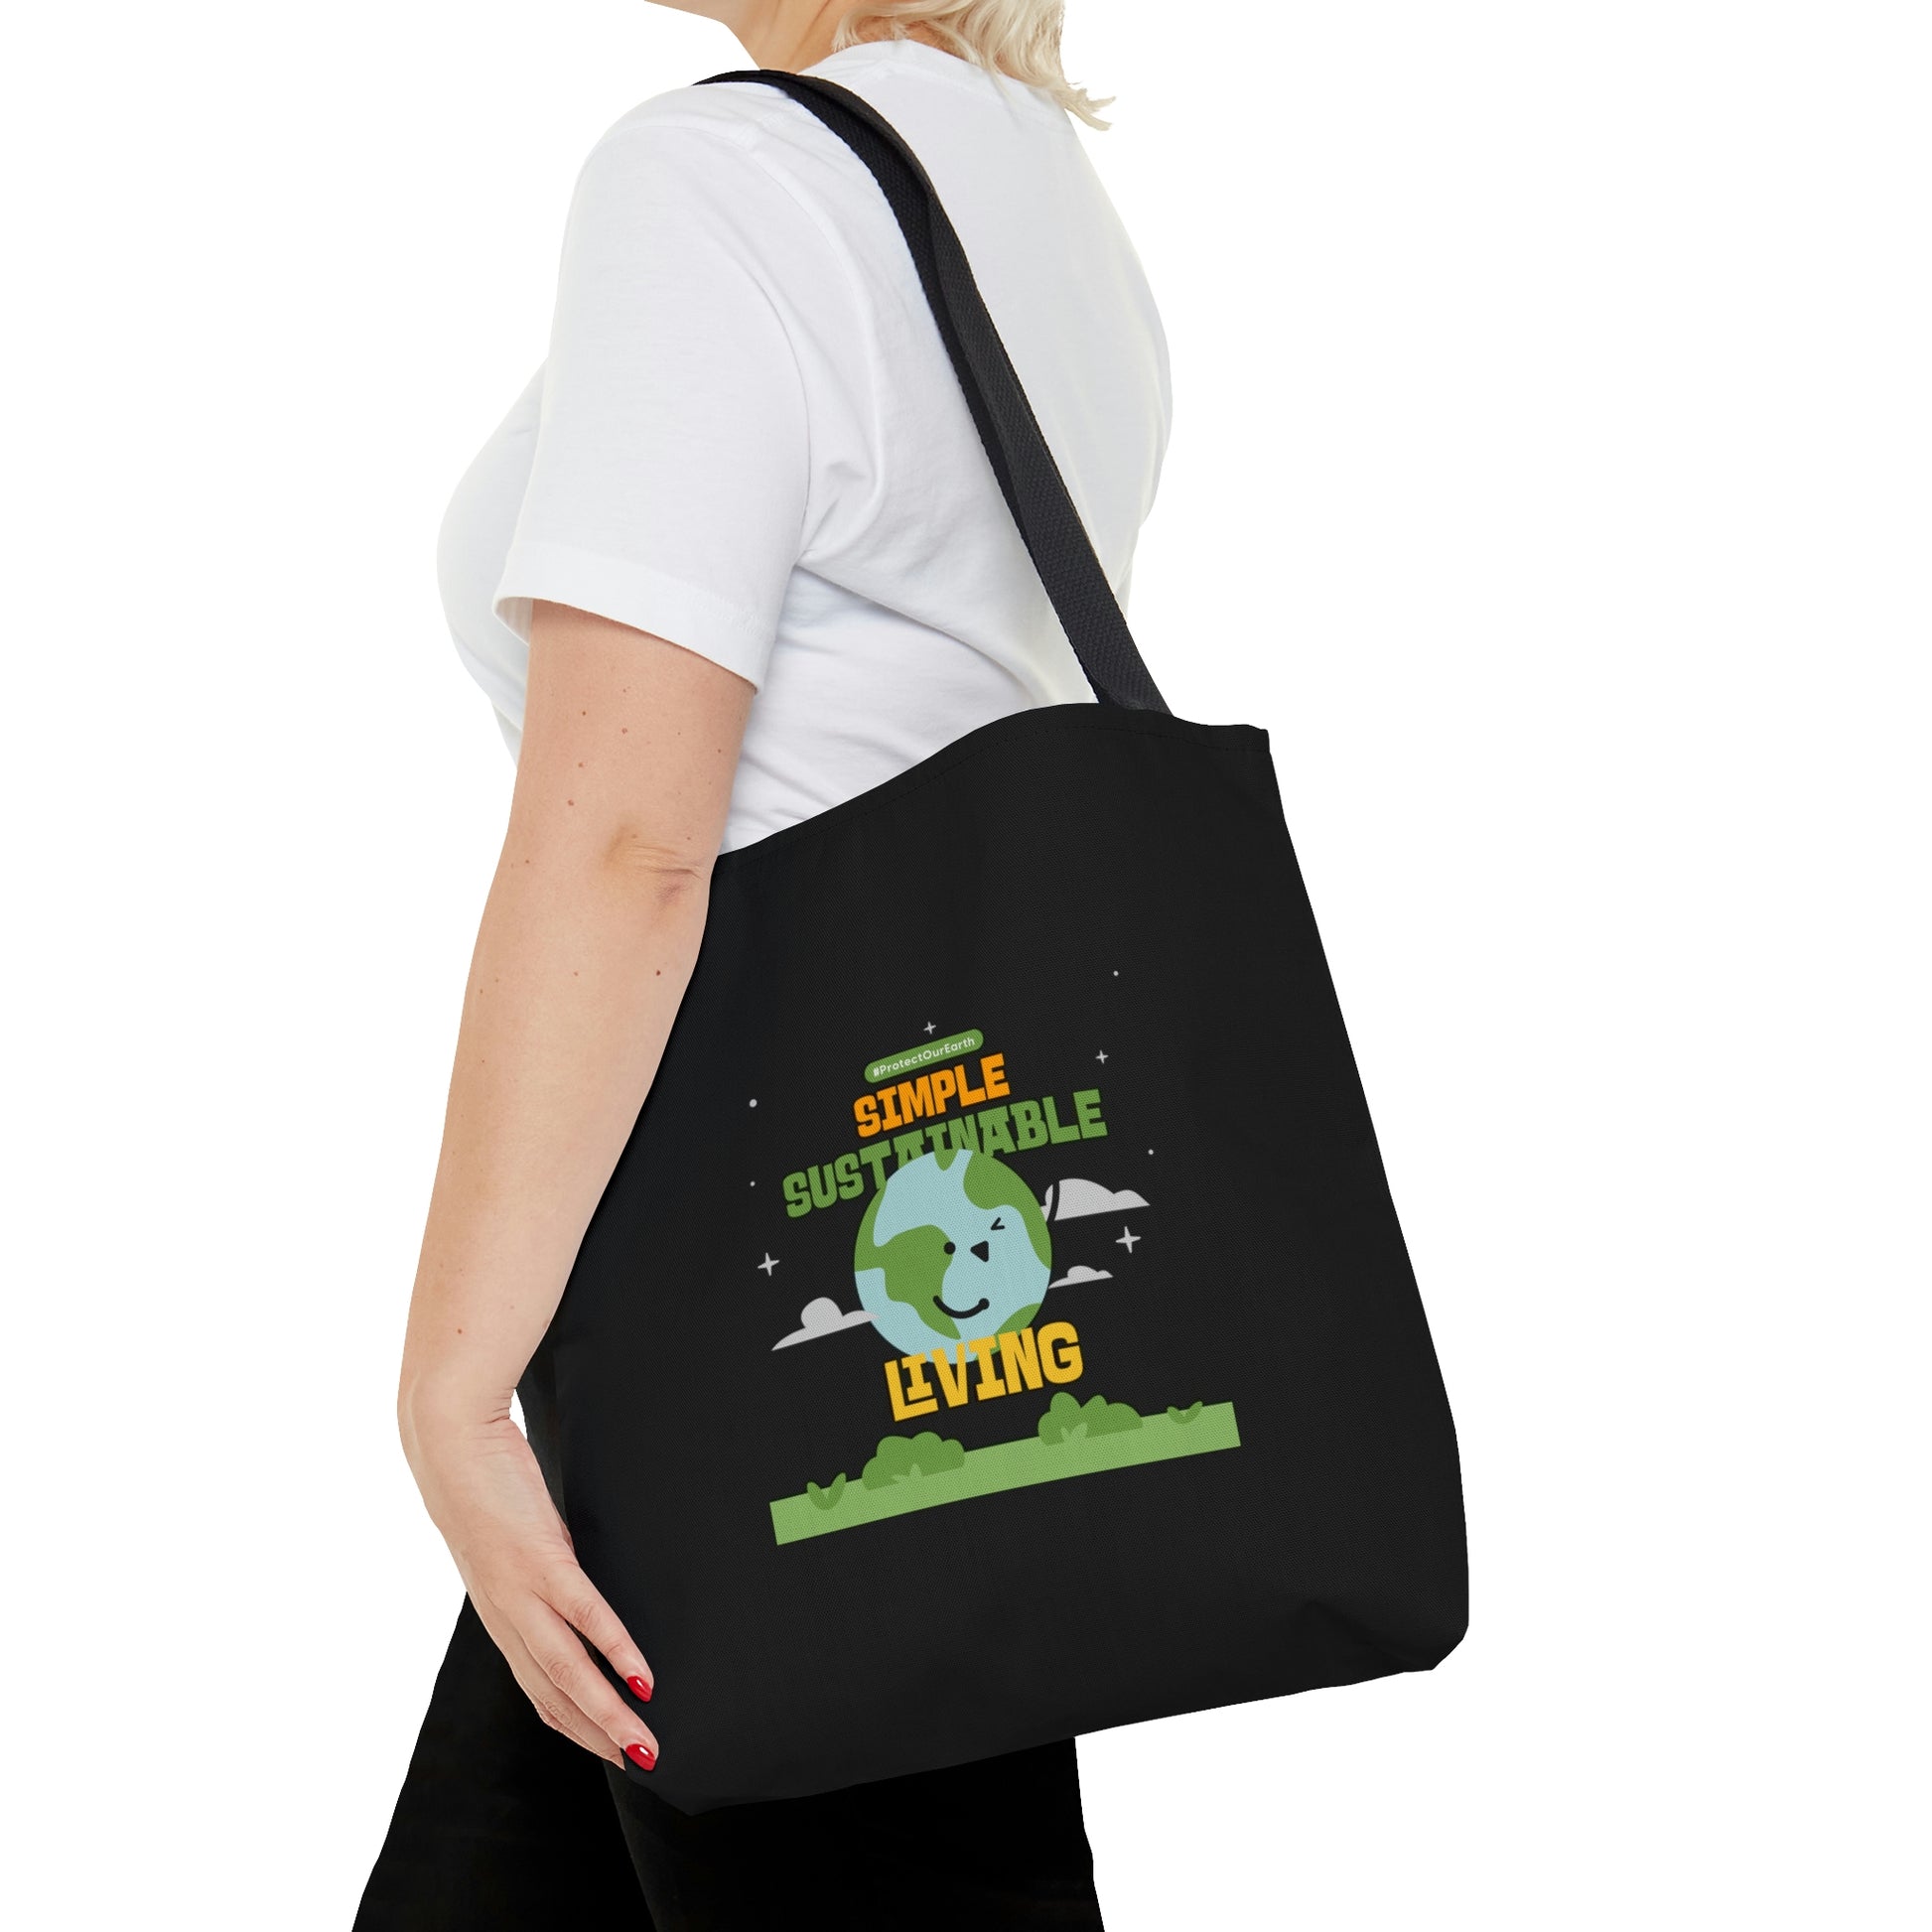 Mock up of a woman carrying the medium tote bag